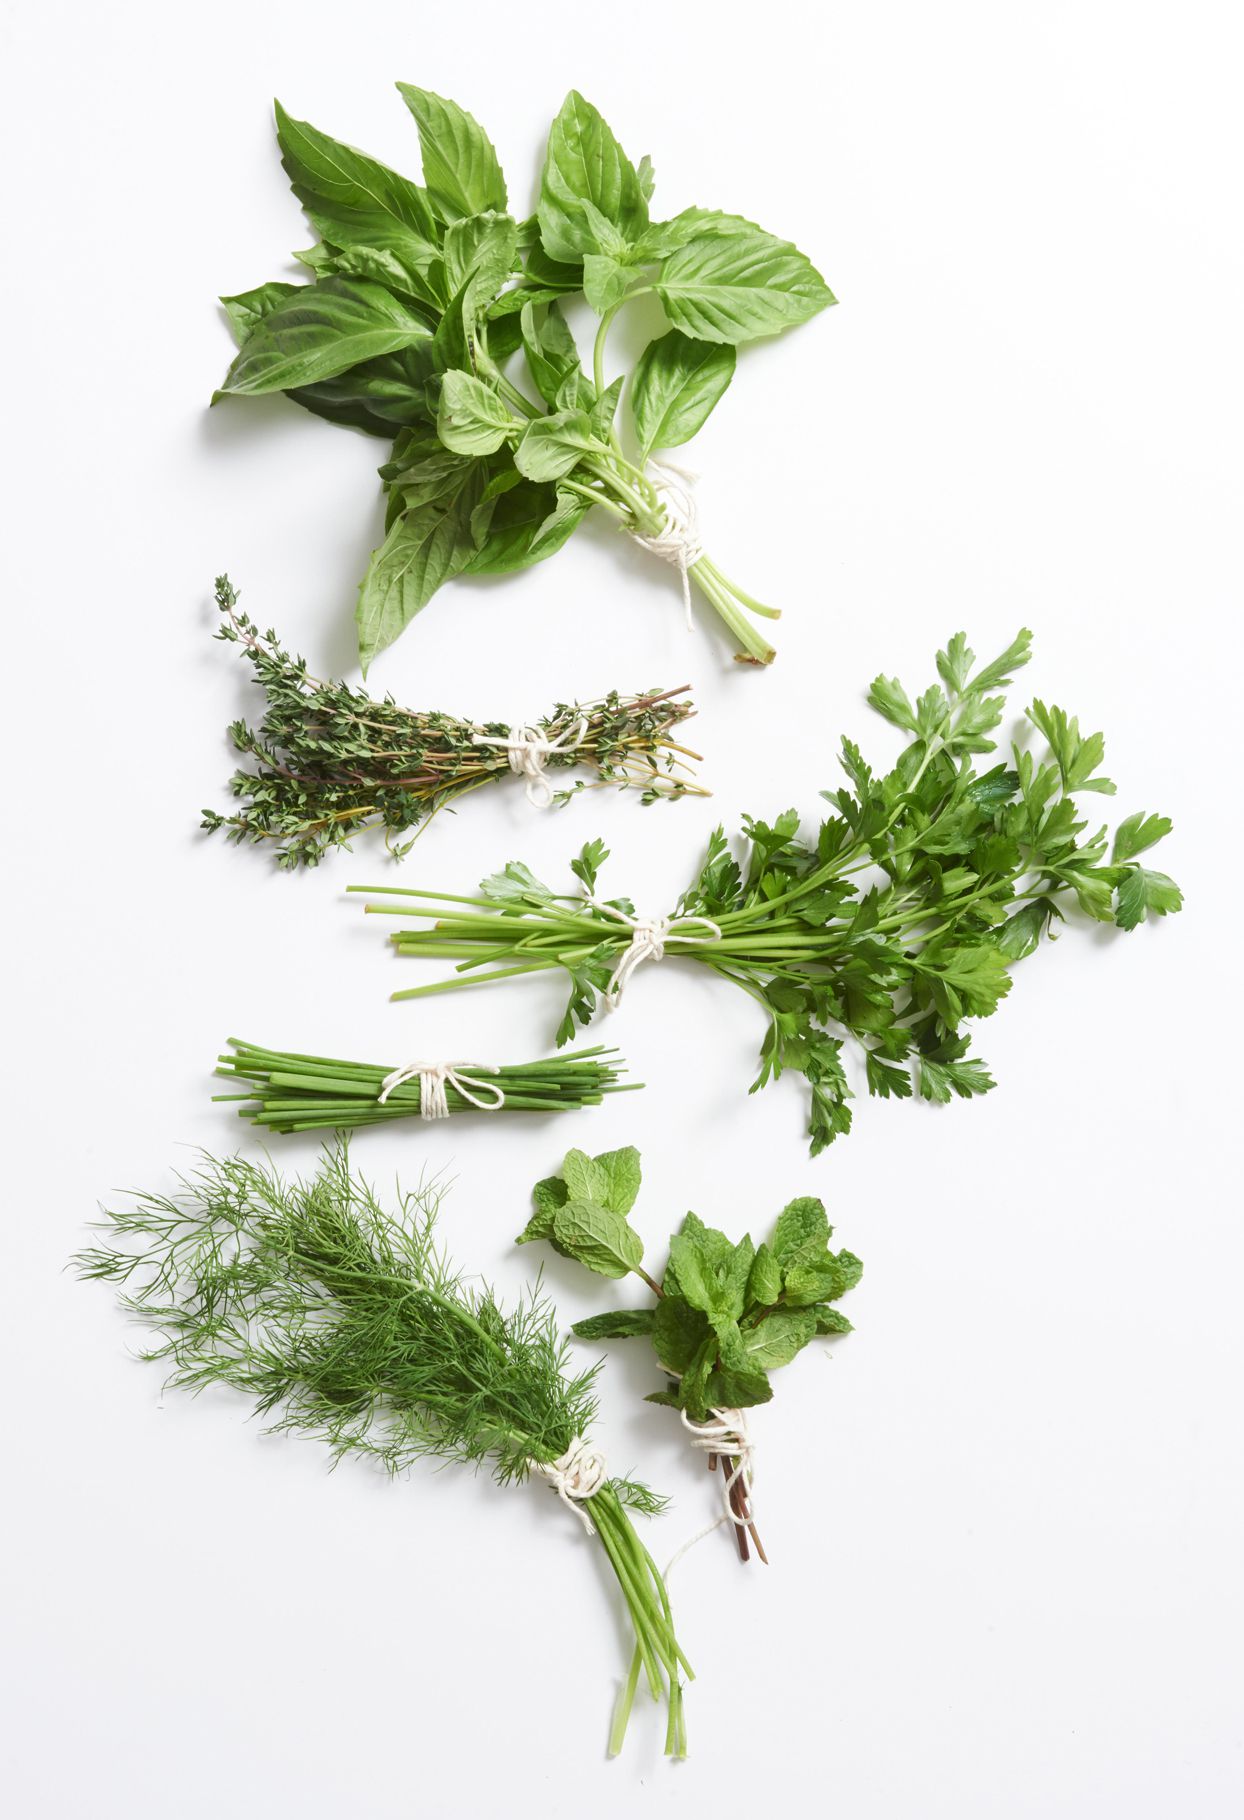 Embracing Herb Gardens - Growing Your Own Fresh Flavors!